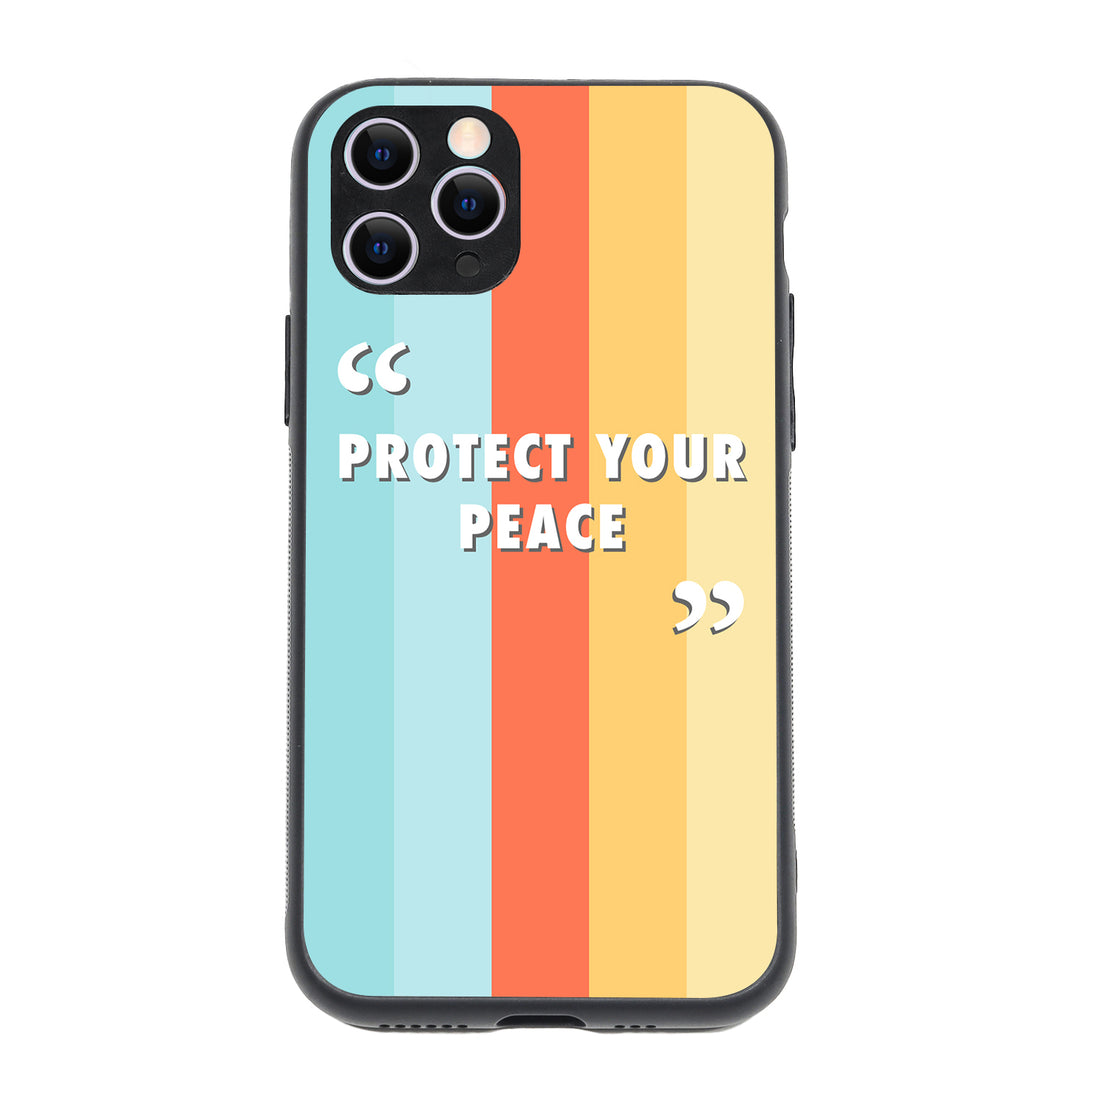 Protect your peace Motivational Quotes iPhone 11 Pro Case